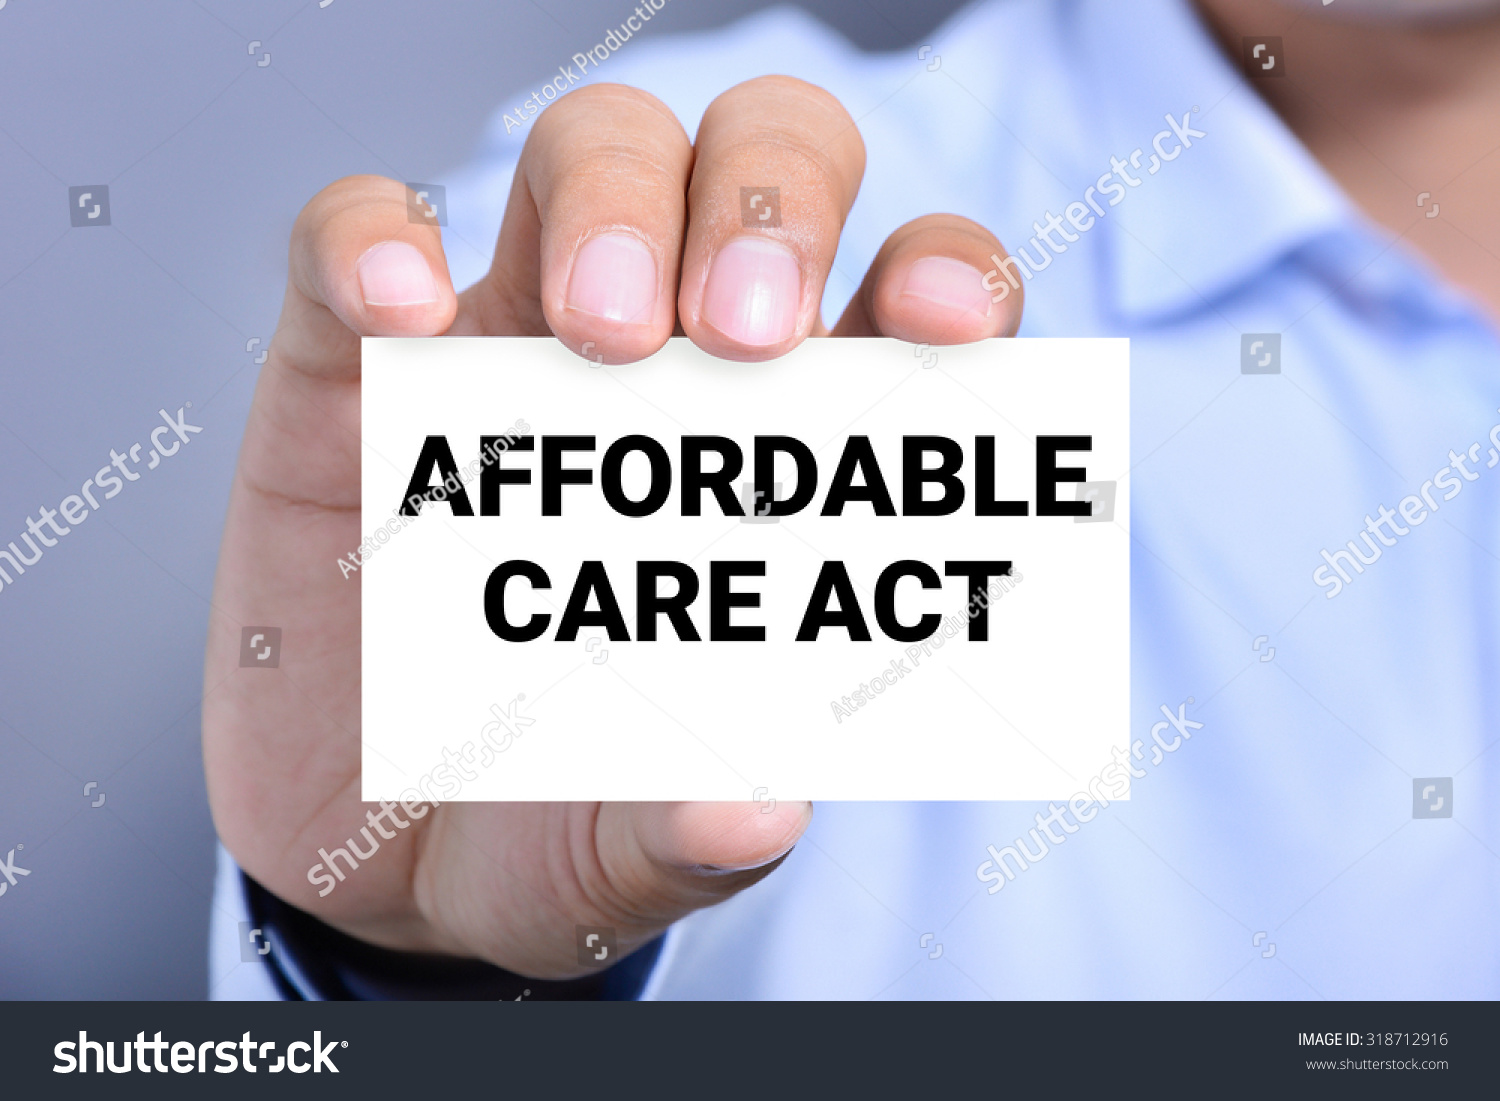 Affordable Care Act Or Aca Message Stock Photo 318712916 - Shutterstock